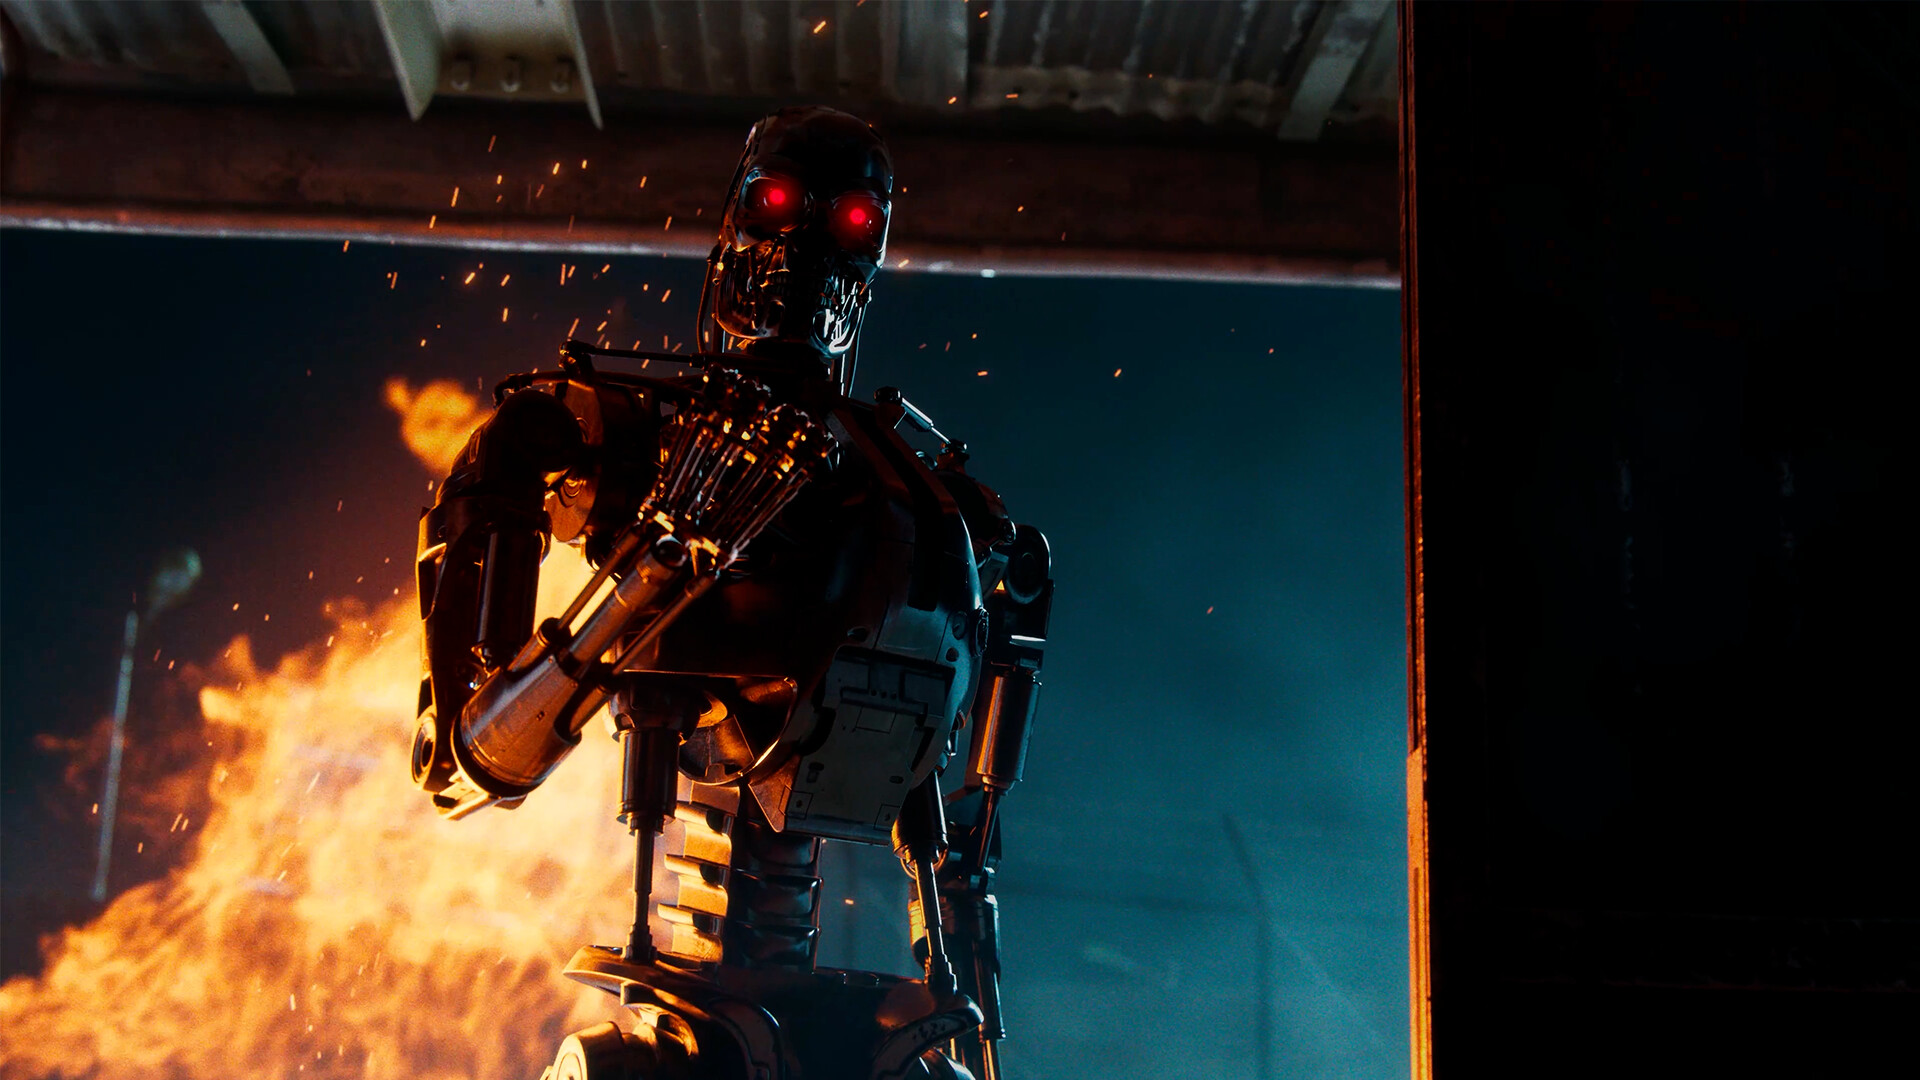 The new open world game “Terminator” will have a T-800 Terminator that constantly chases players and cannot be killed – Computer King Ada